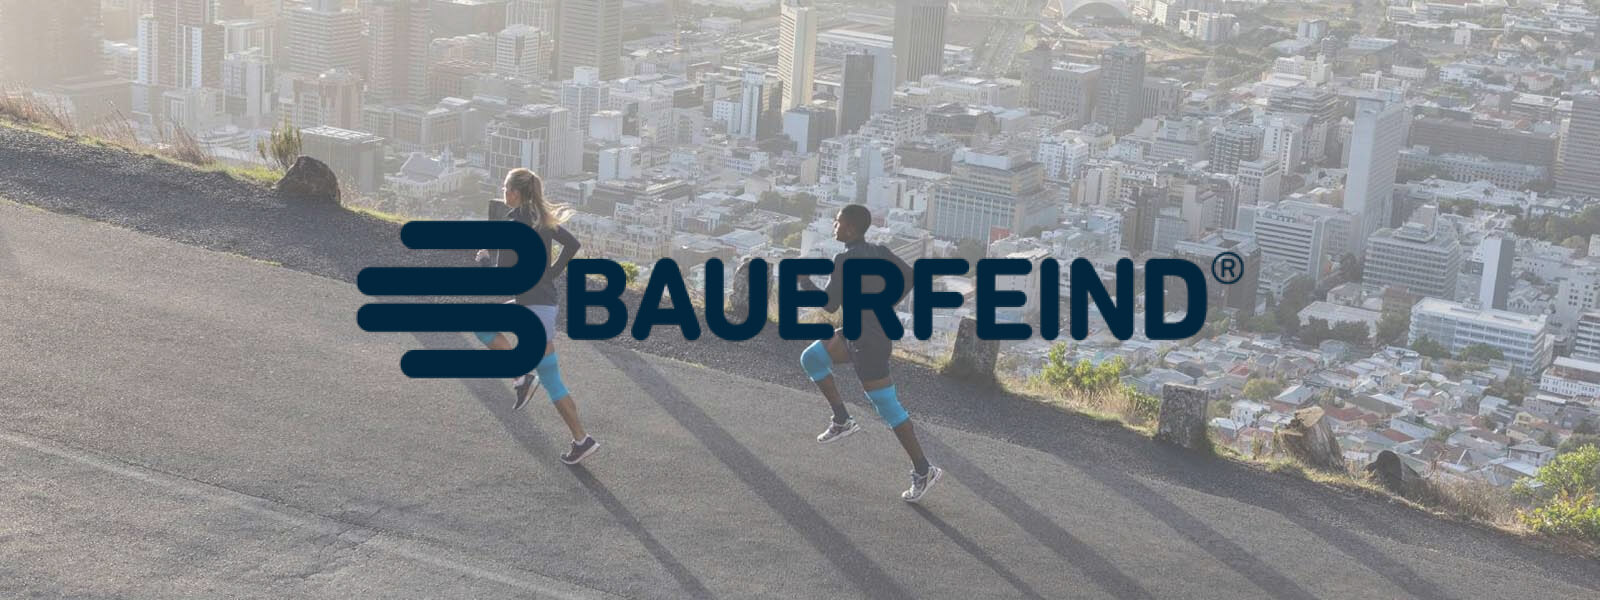 Bauer enemy lettering in a picture where two runners run on a mountain over the city